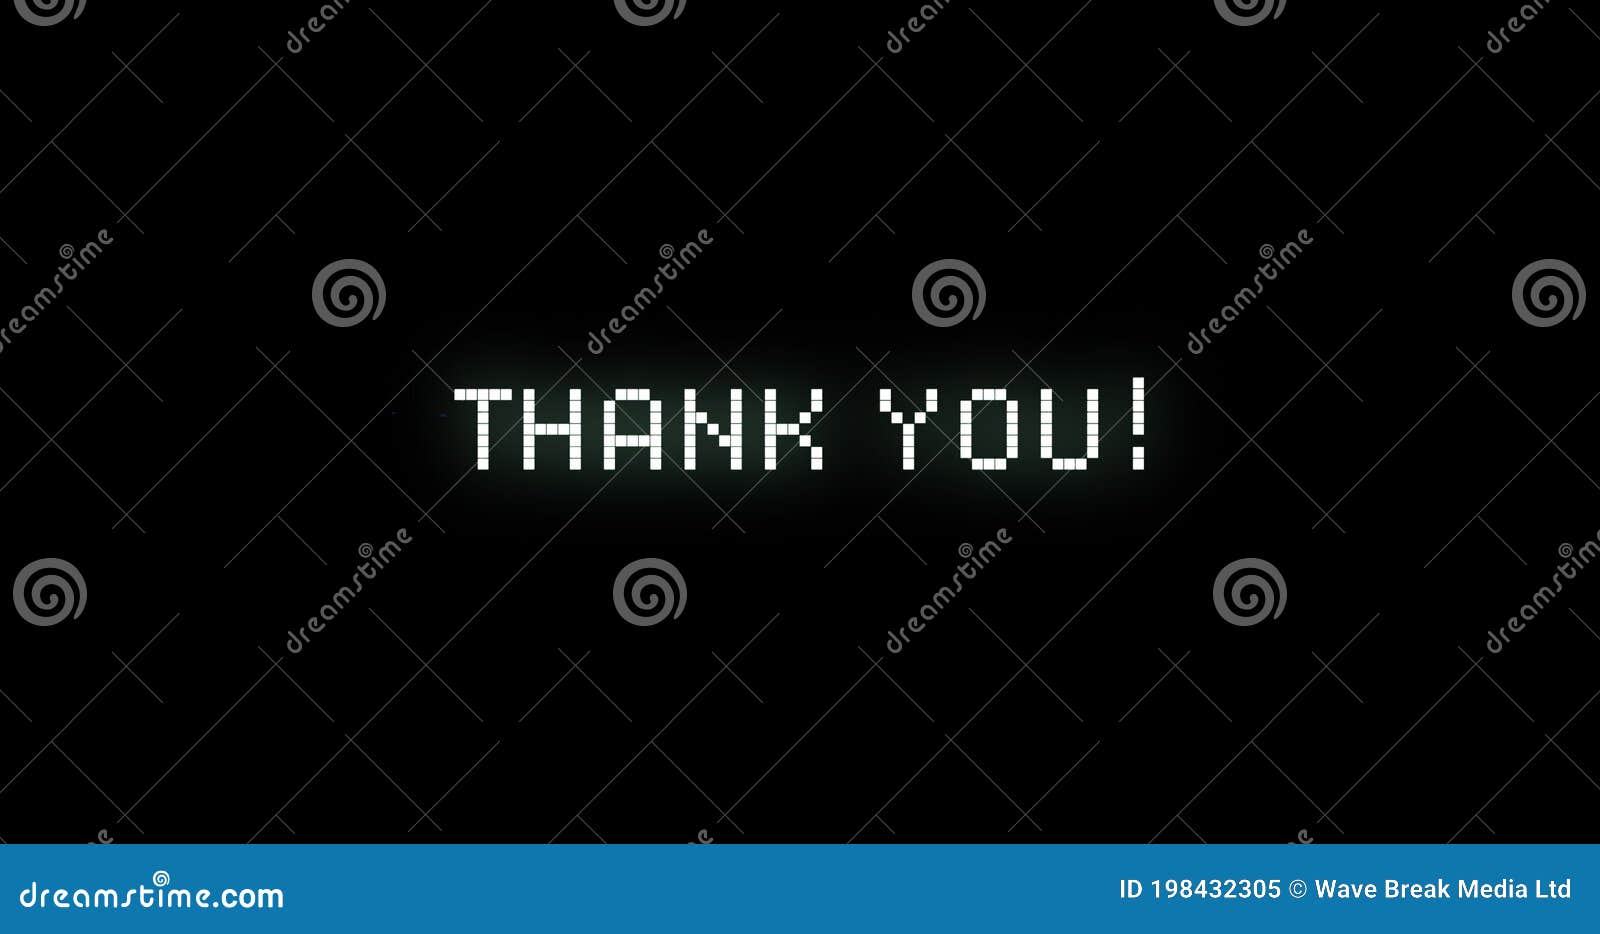 Thank You Text Flickering Against Black Background Stock Video - Video of  entertainment, effect: 198432305